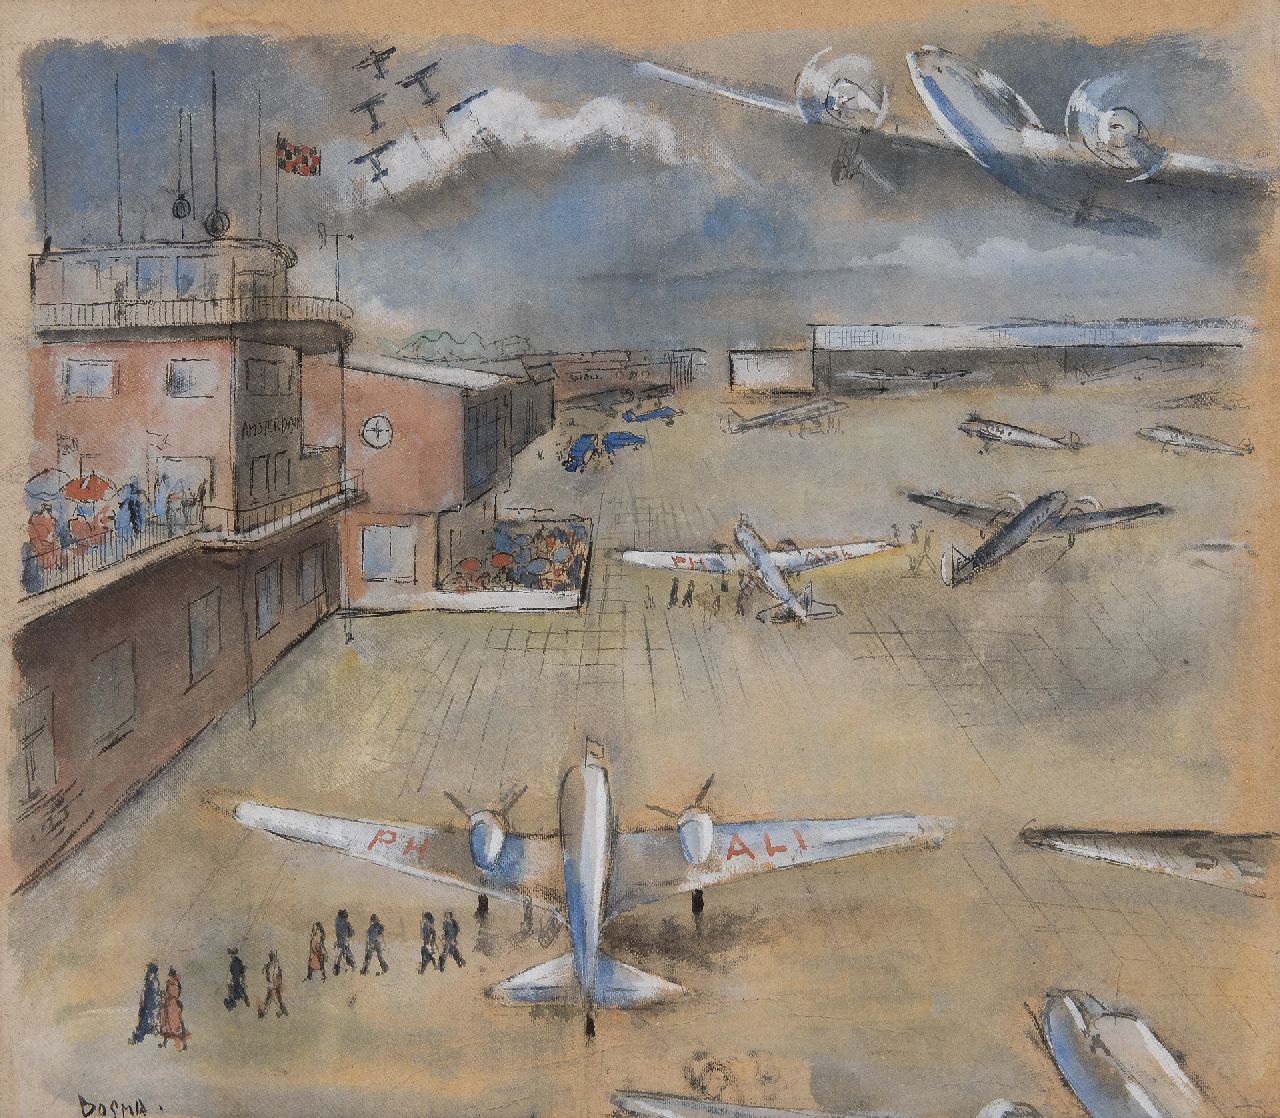 Bosma W.  | Willem 'Wim' Bosma, Airport Schiphol with the KLM Douglas DC-3 'Ibis', chalk and gouache on cardboard 54.4 x 62.0 cm, signed l.l. and executed late 30s